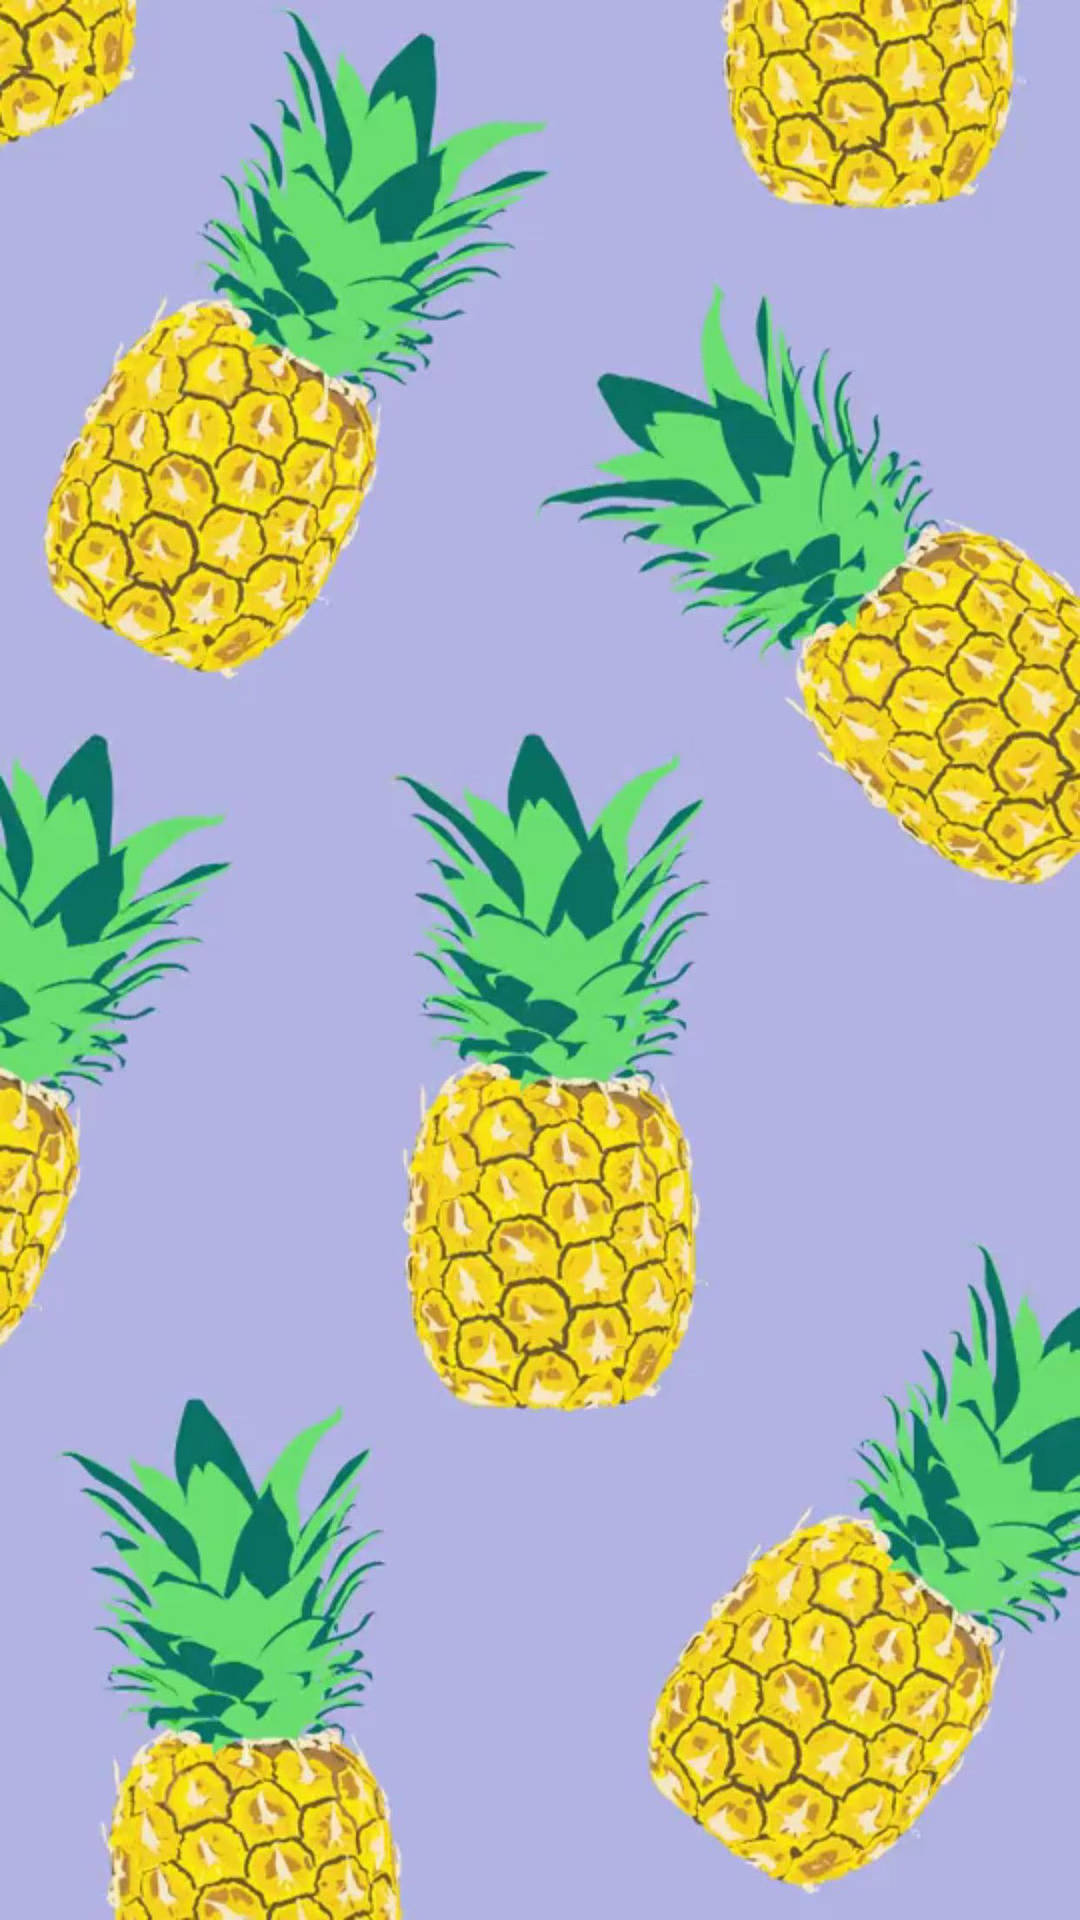 35 Pineapple Wallpaper for iPhone Free Downloads  Welcome To The One  Percent  Flower iphone wallpaper Pretty wallpaper iphone Iphone wallpaper